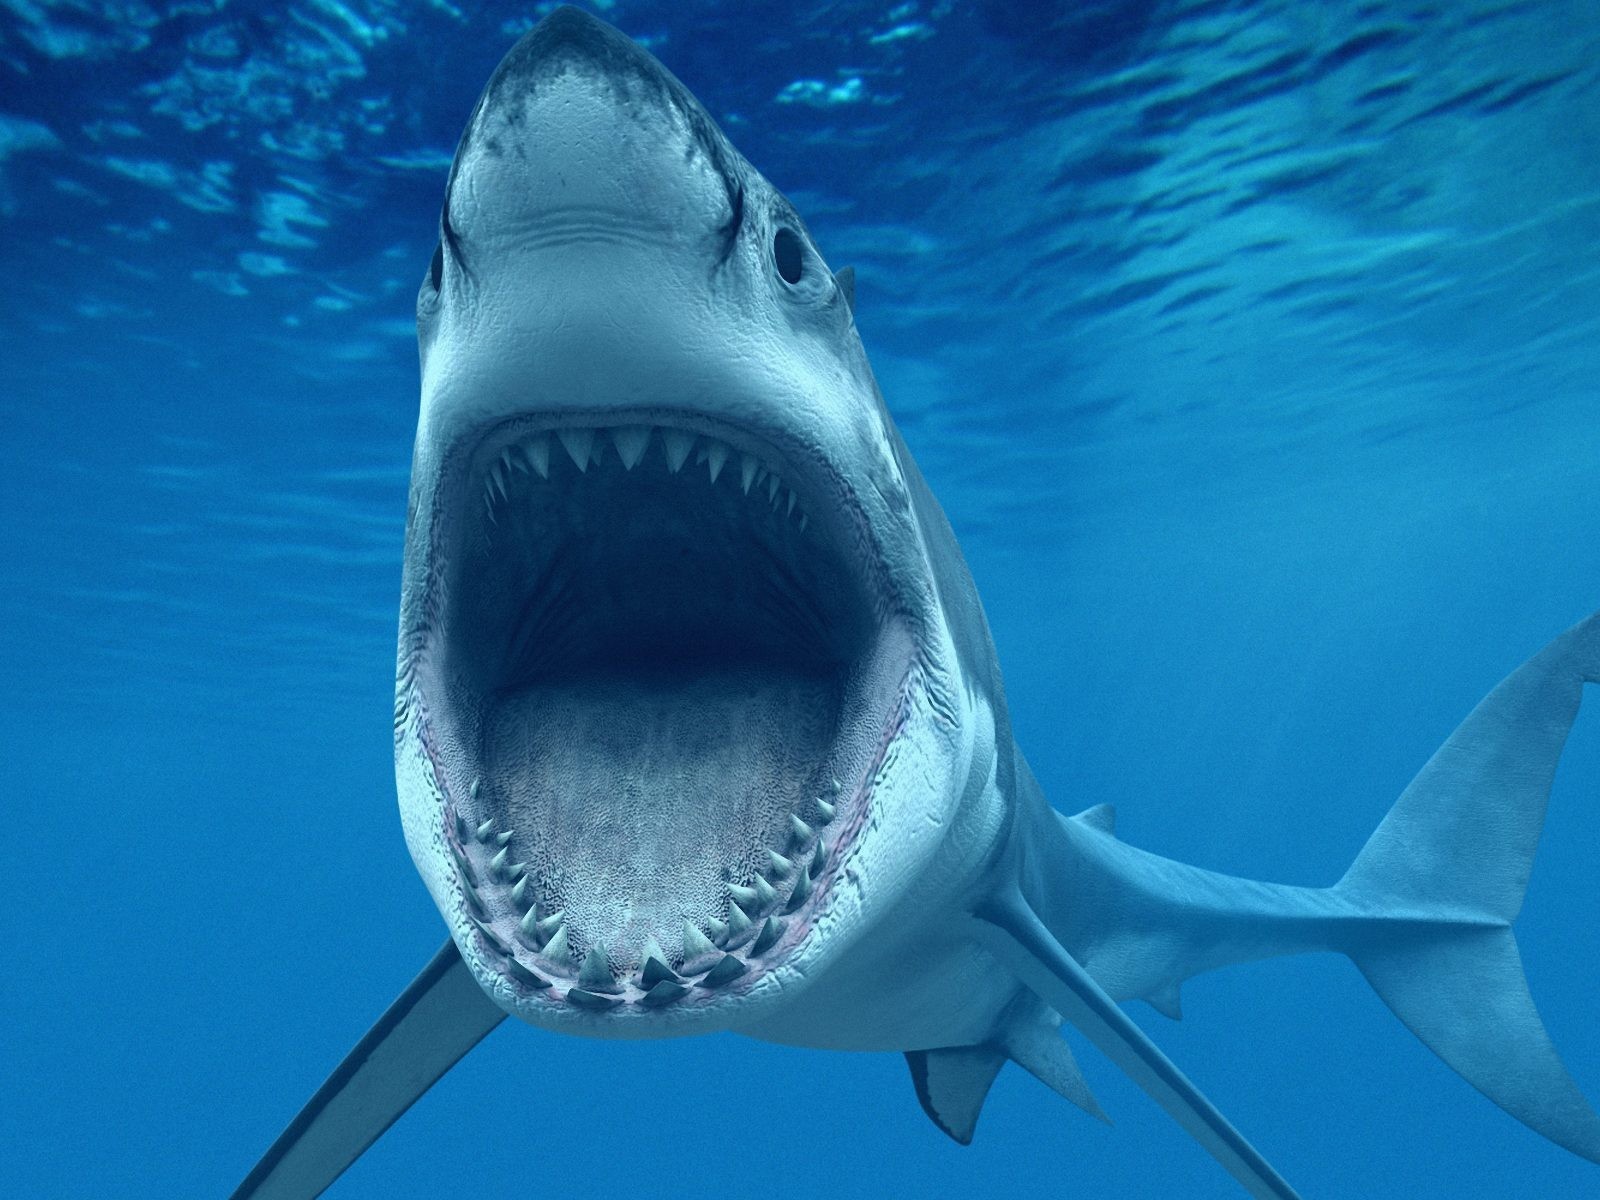 Scientists have found a medical use for shark skin